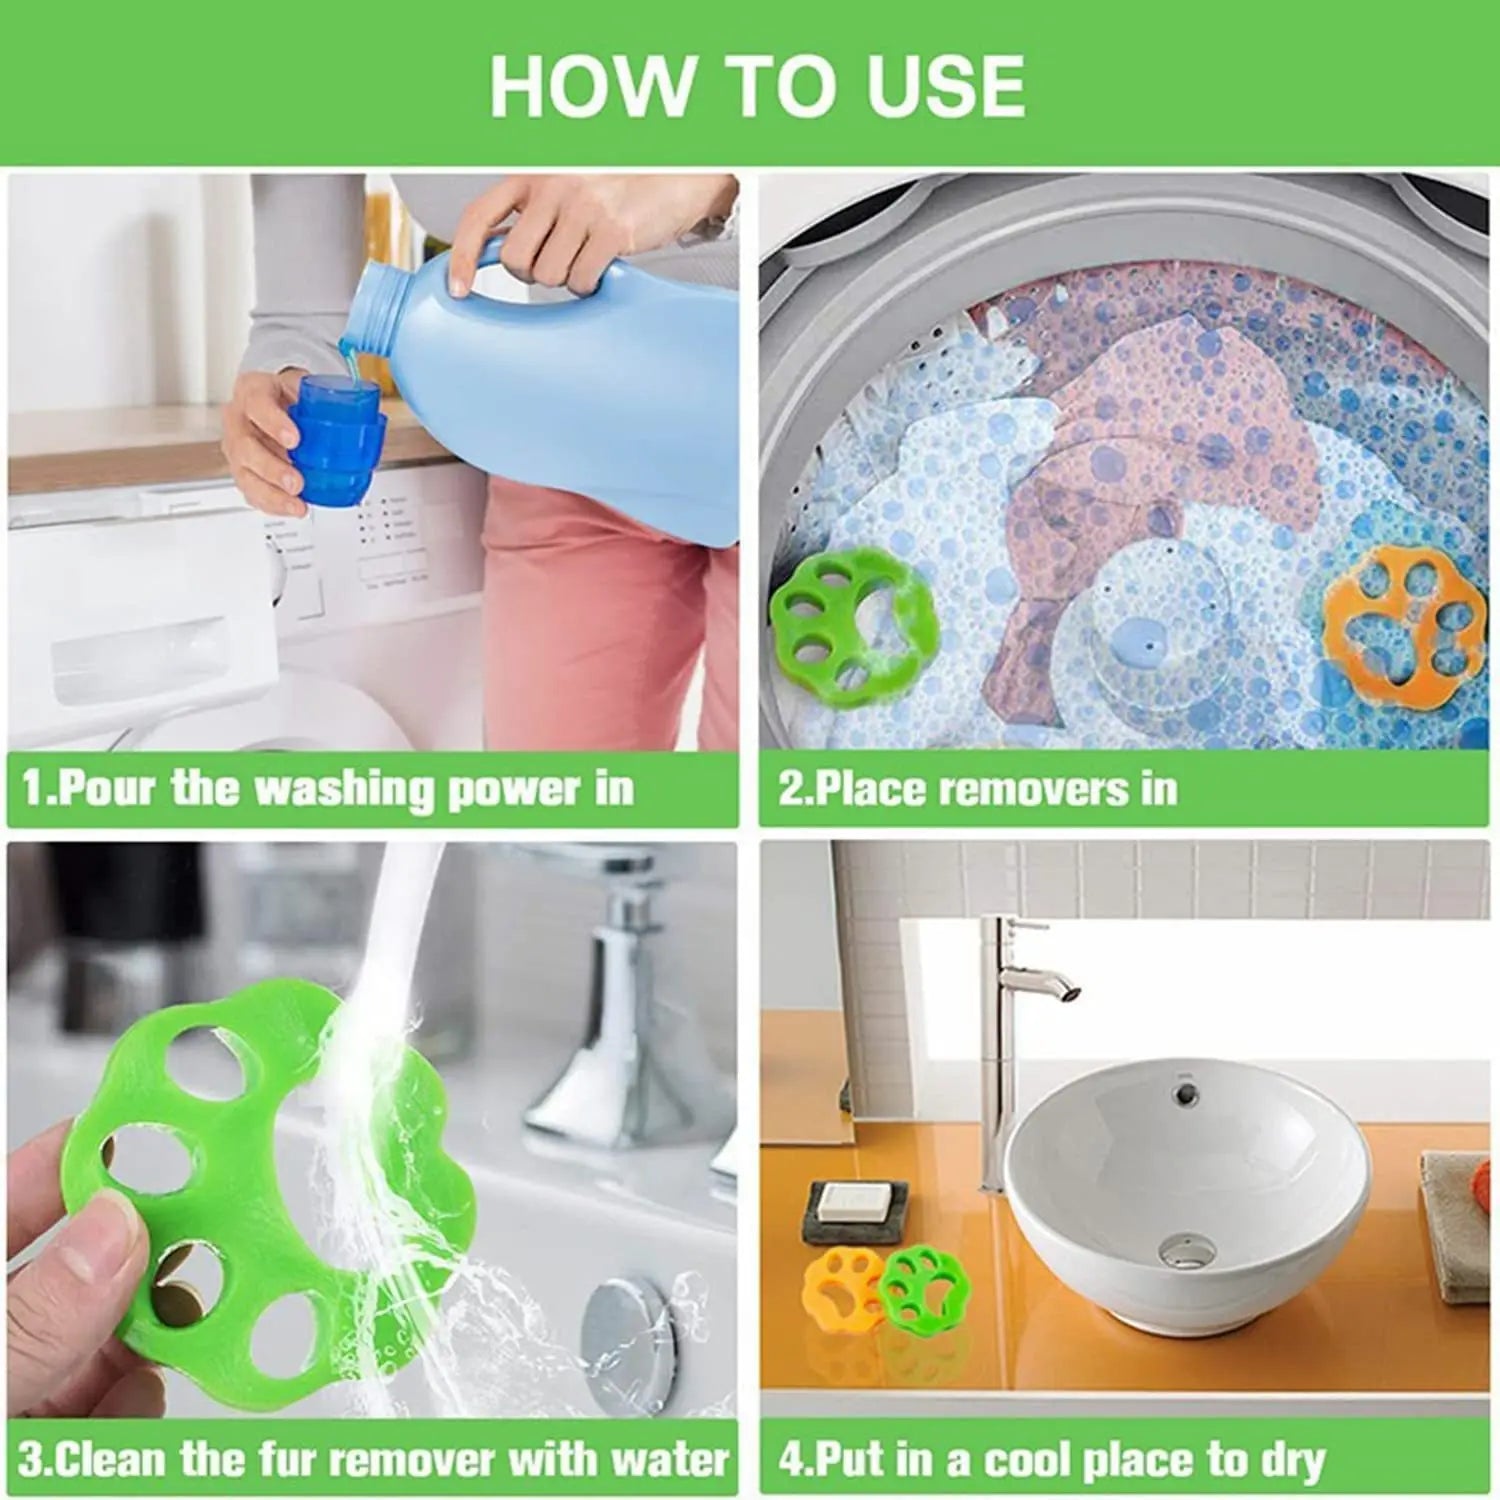 Catch Those Fuzzy Critters! Reusable Pet Hair Remover for Laundry (Works in Washer & Dryer).